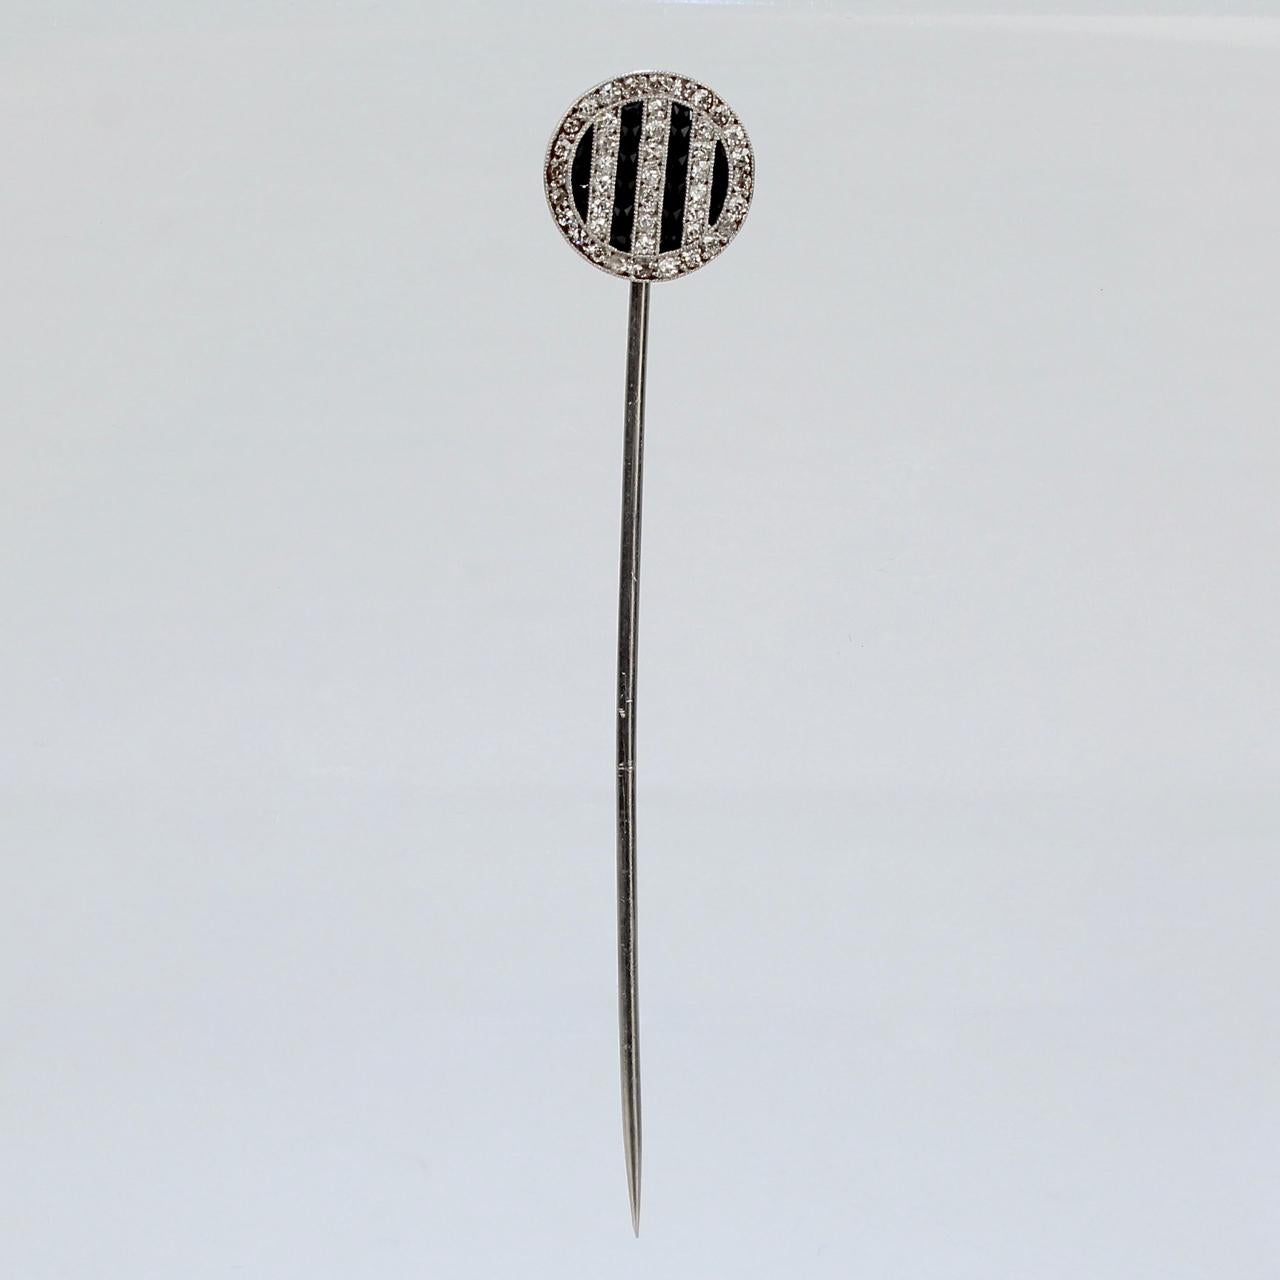 A very fine period Art Deco stick pin.

With rows of diamonds and onyx encircled by diamonds in a round platinum setting.

Unmarked for fineness.

Simply a wonderful Deco piece!

Length: ca. 77 mm
Diameter: ca. 14 mm

Items purchased from this